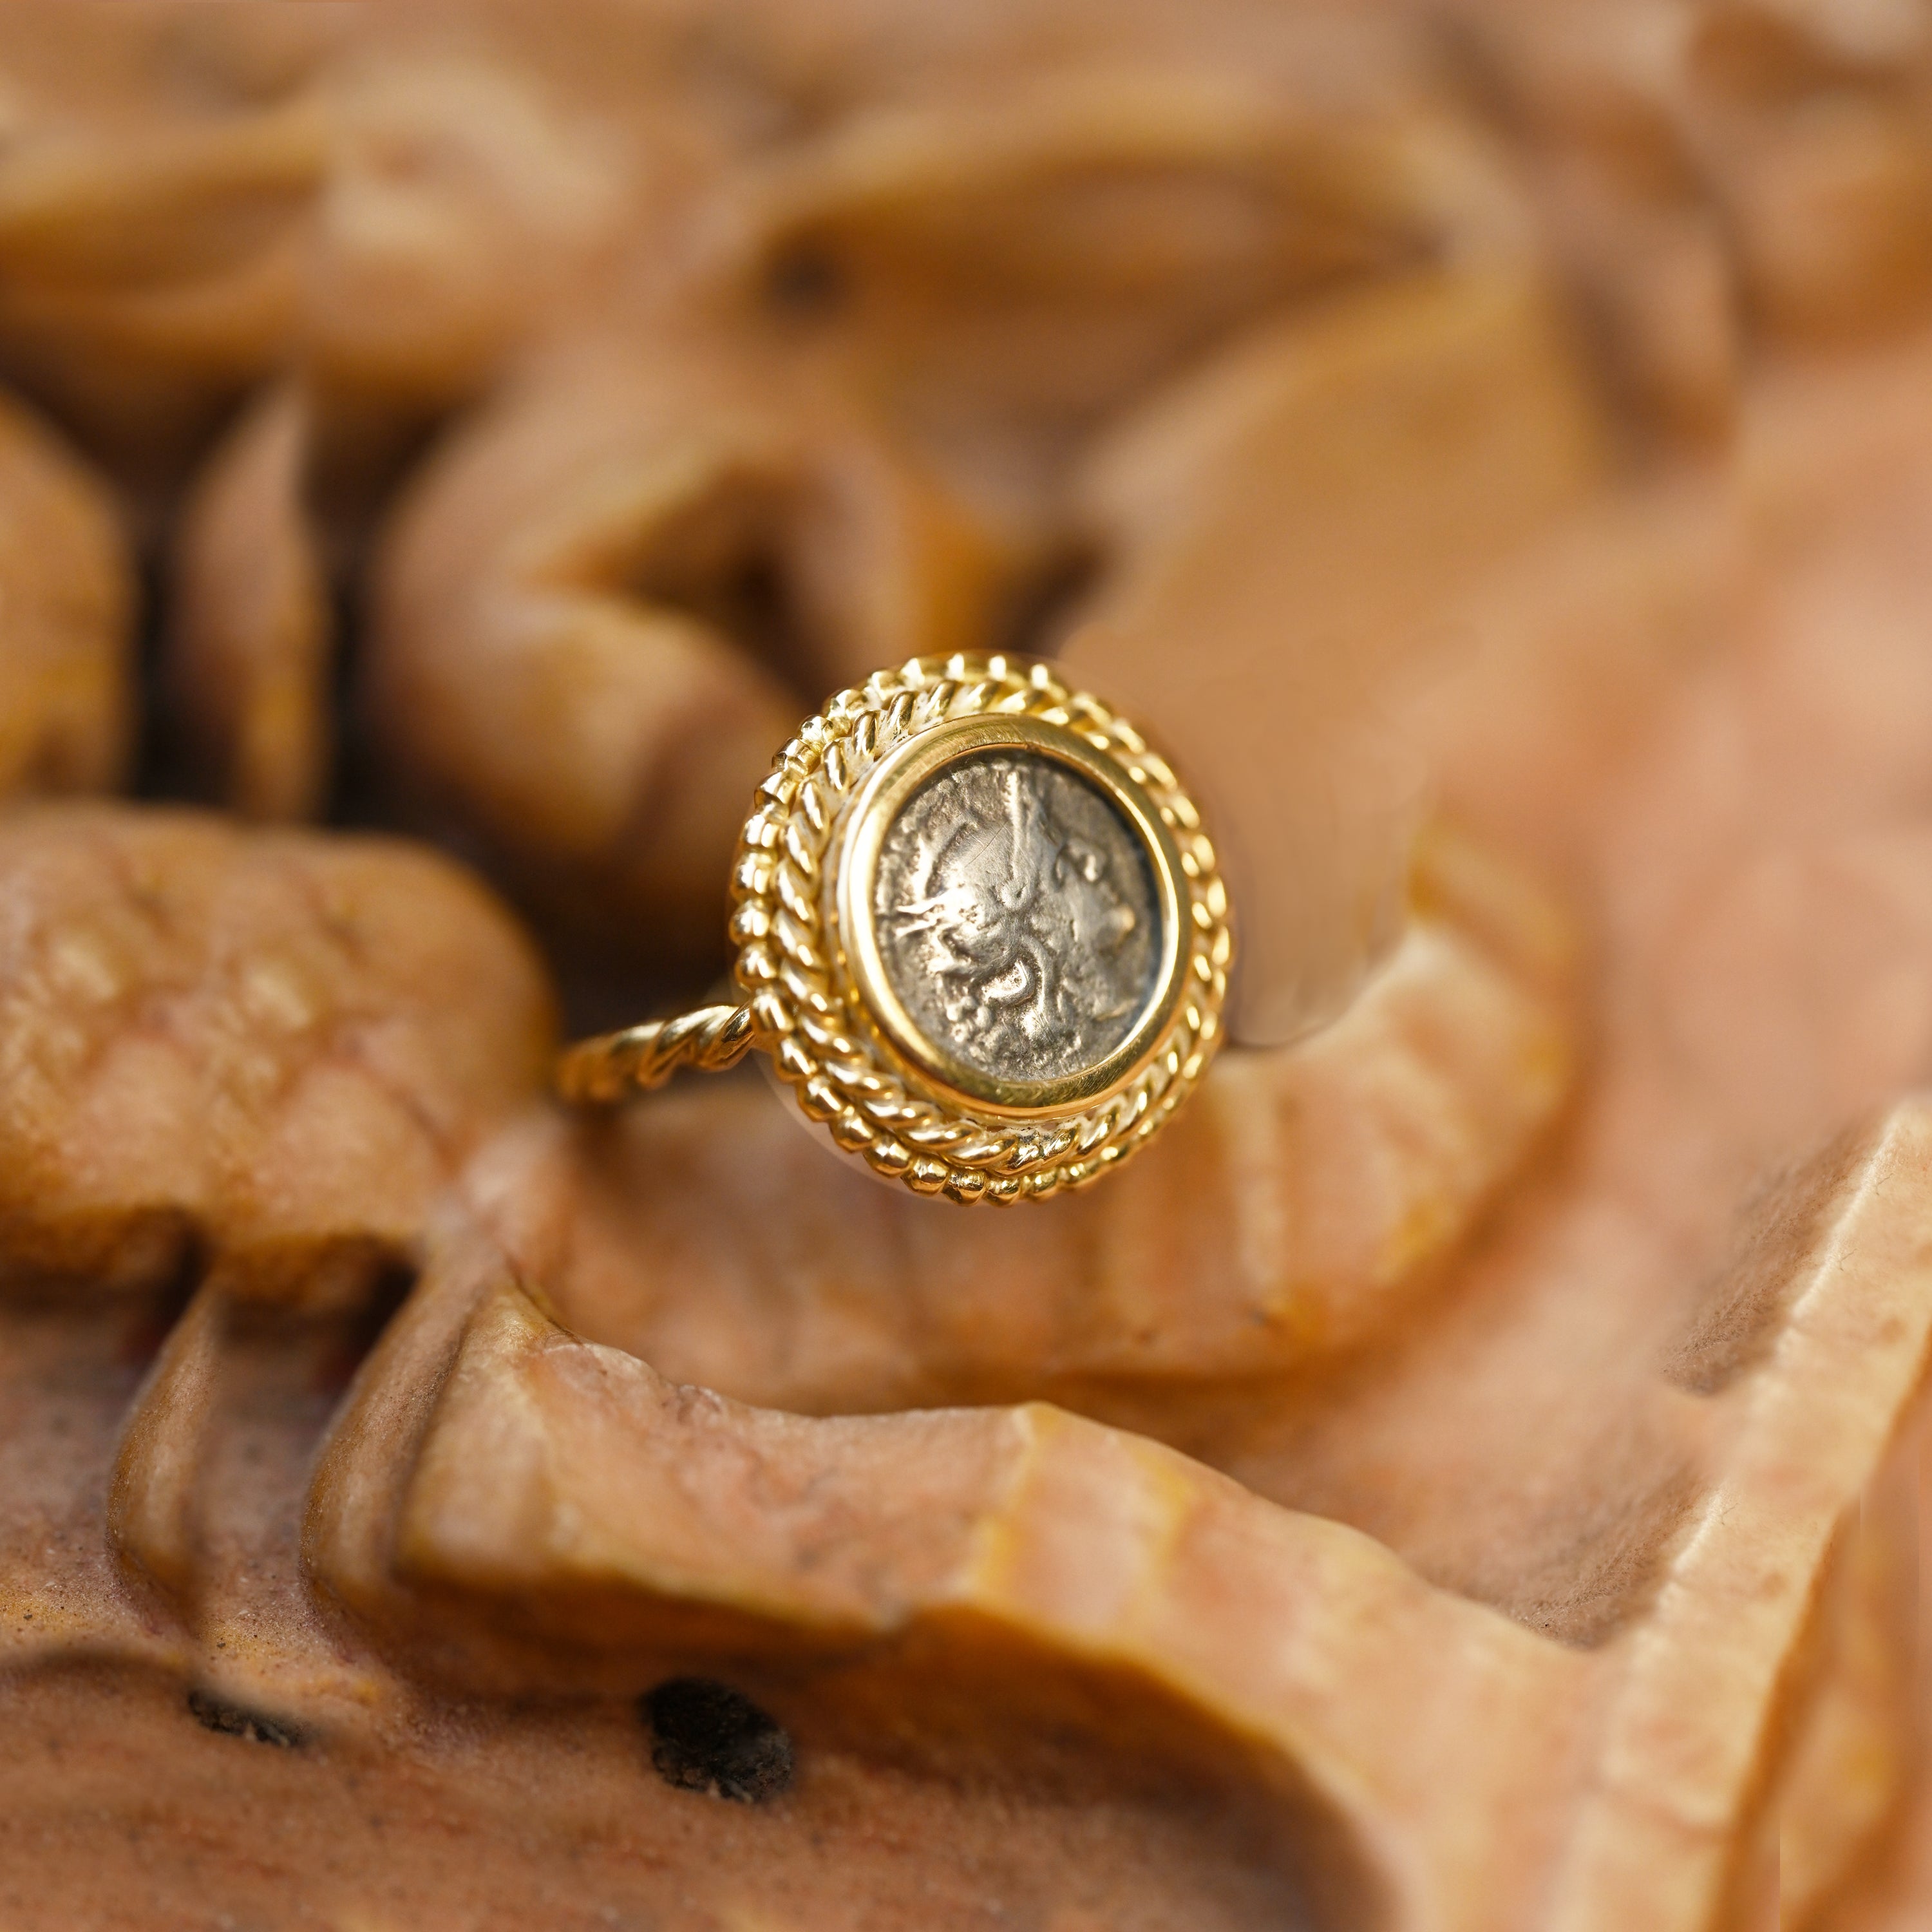 American Eagle Coin Rings 14k Yellow gold American Eagle Coin Rings  American Eagle Coin | Sarraf.com